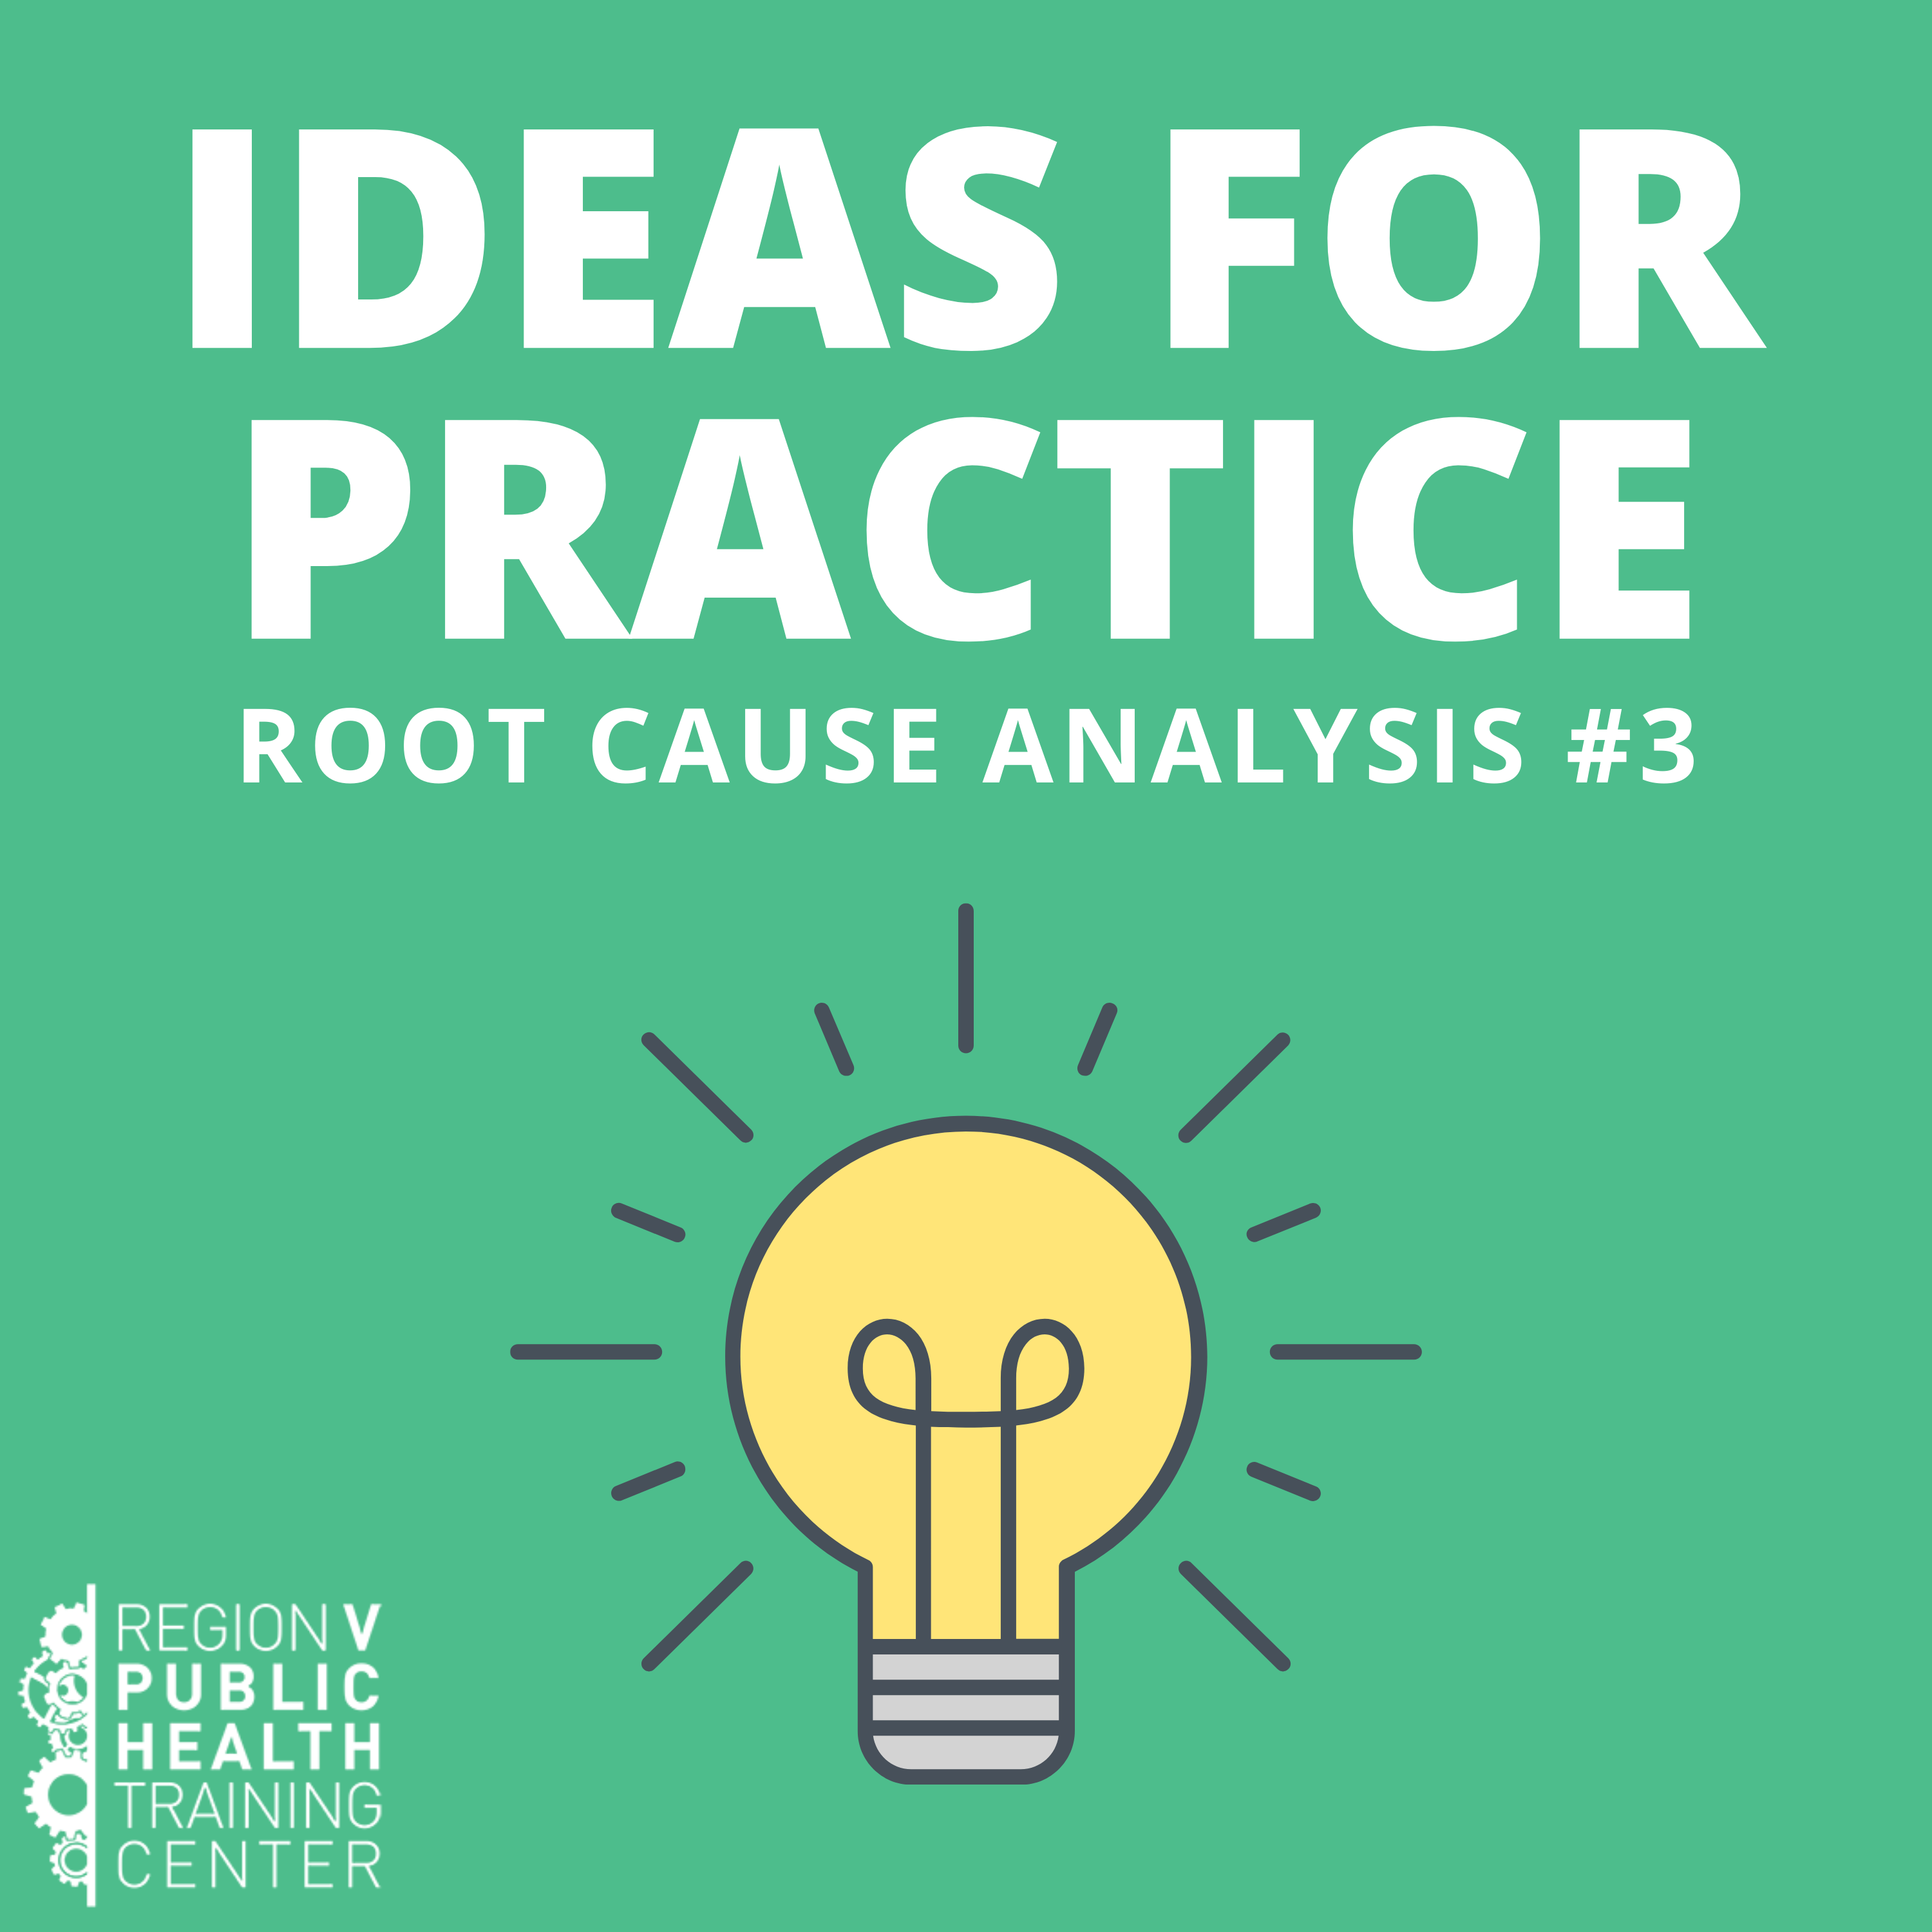 Ideas for Practice Root Cause Analysis #3. Illustration of a lightbulb and the Region V Public Health Training Center logo.